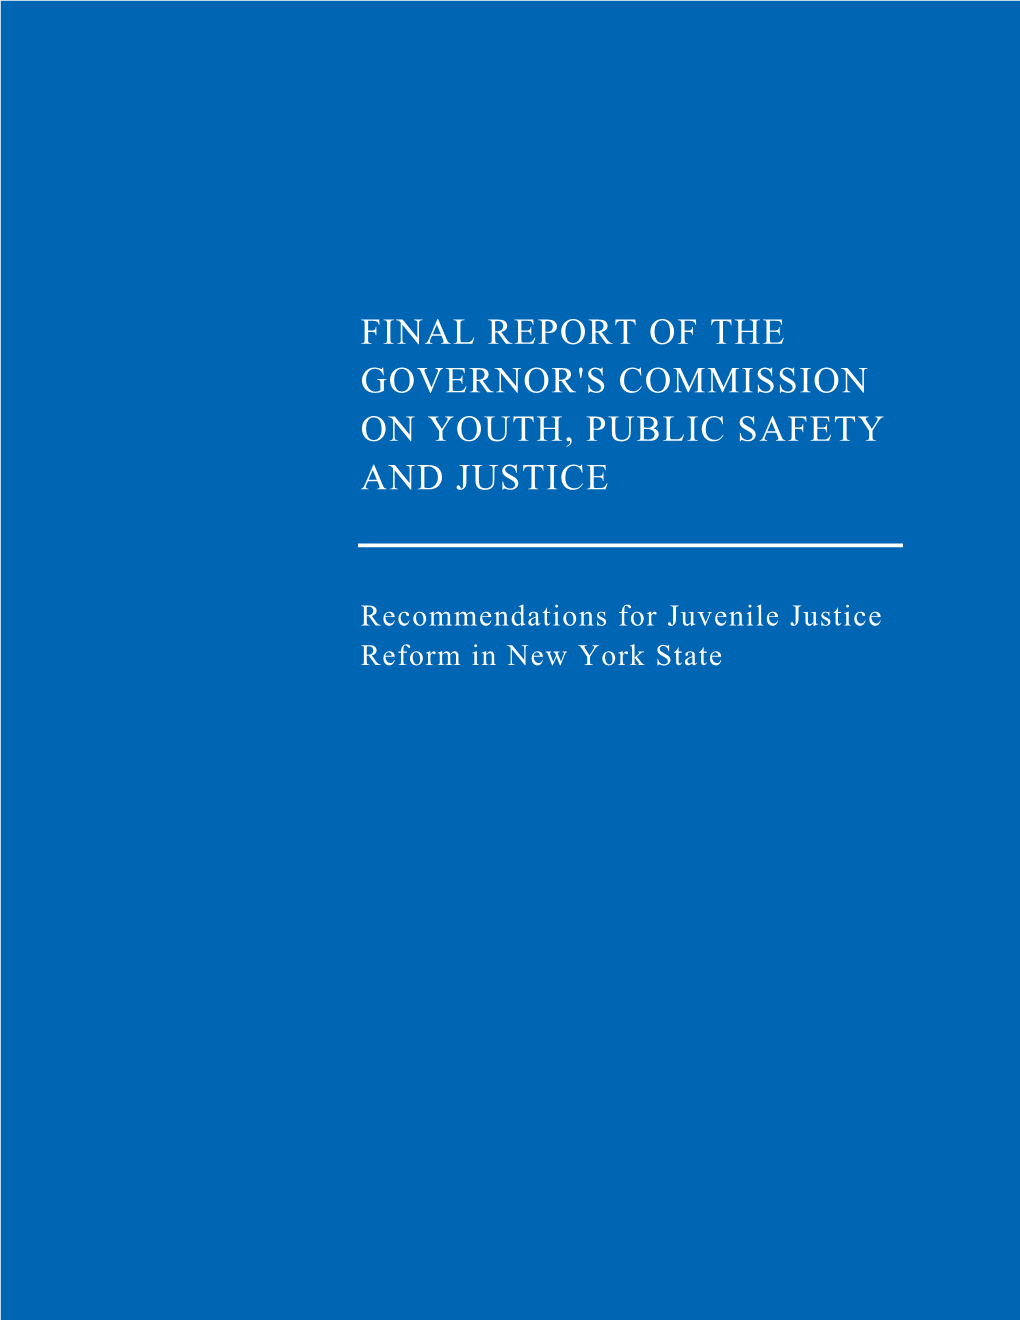 Final Report of the Commission on Youth, Public Safety and Justice